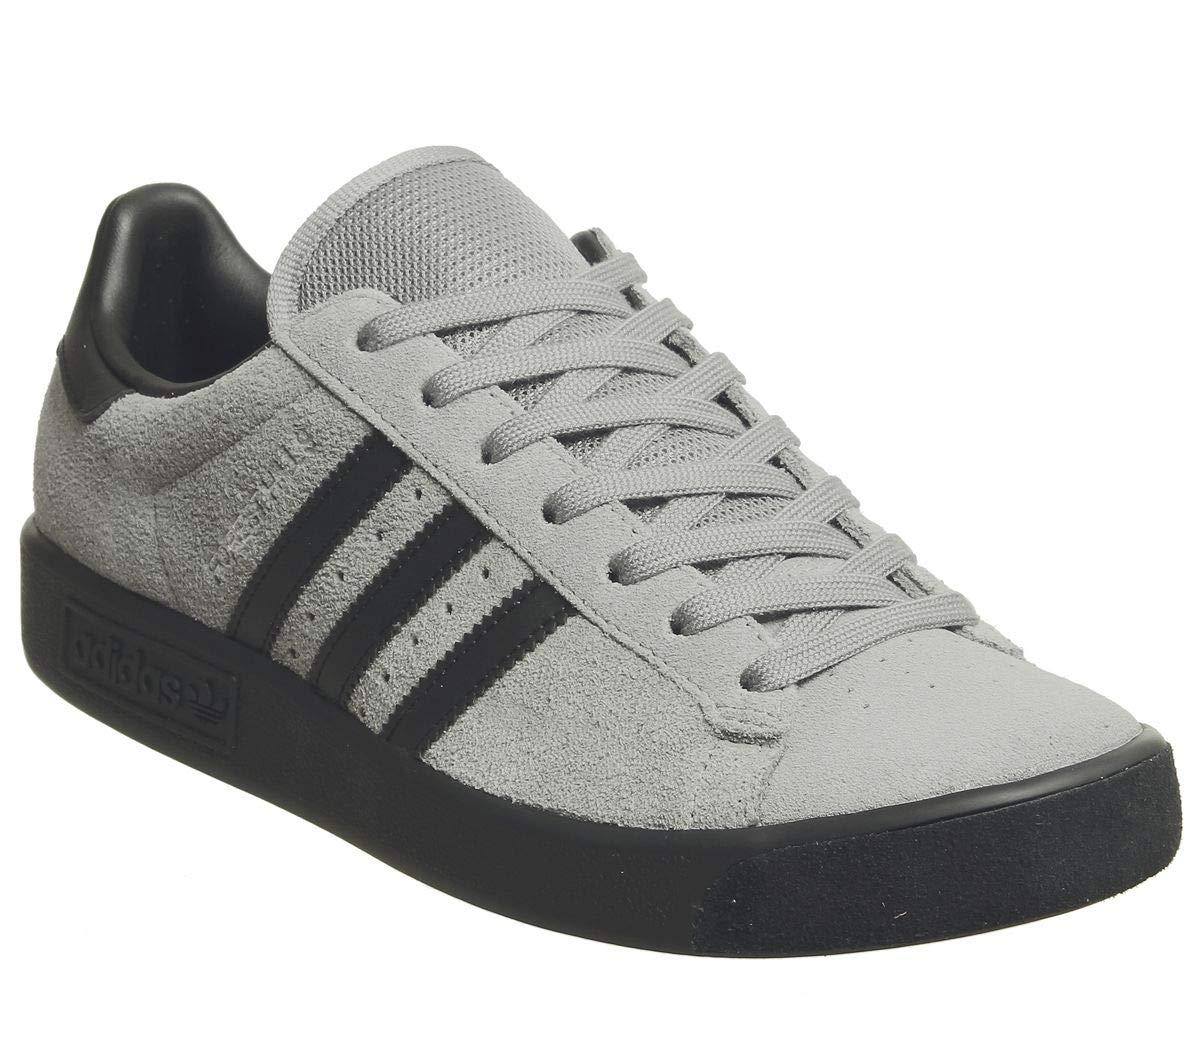 adidas Forest Hills Grey Three Core Black Exclusive - 4 Uk in Grey for | Lyst UK